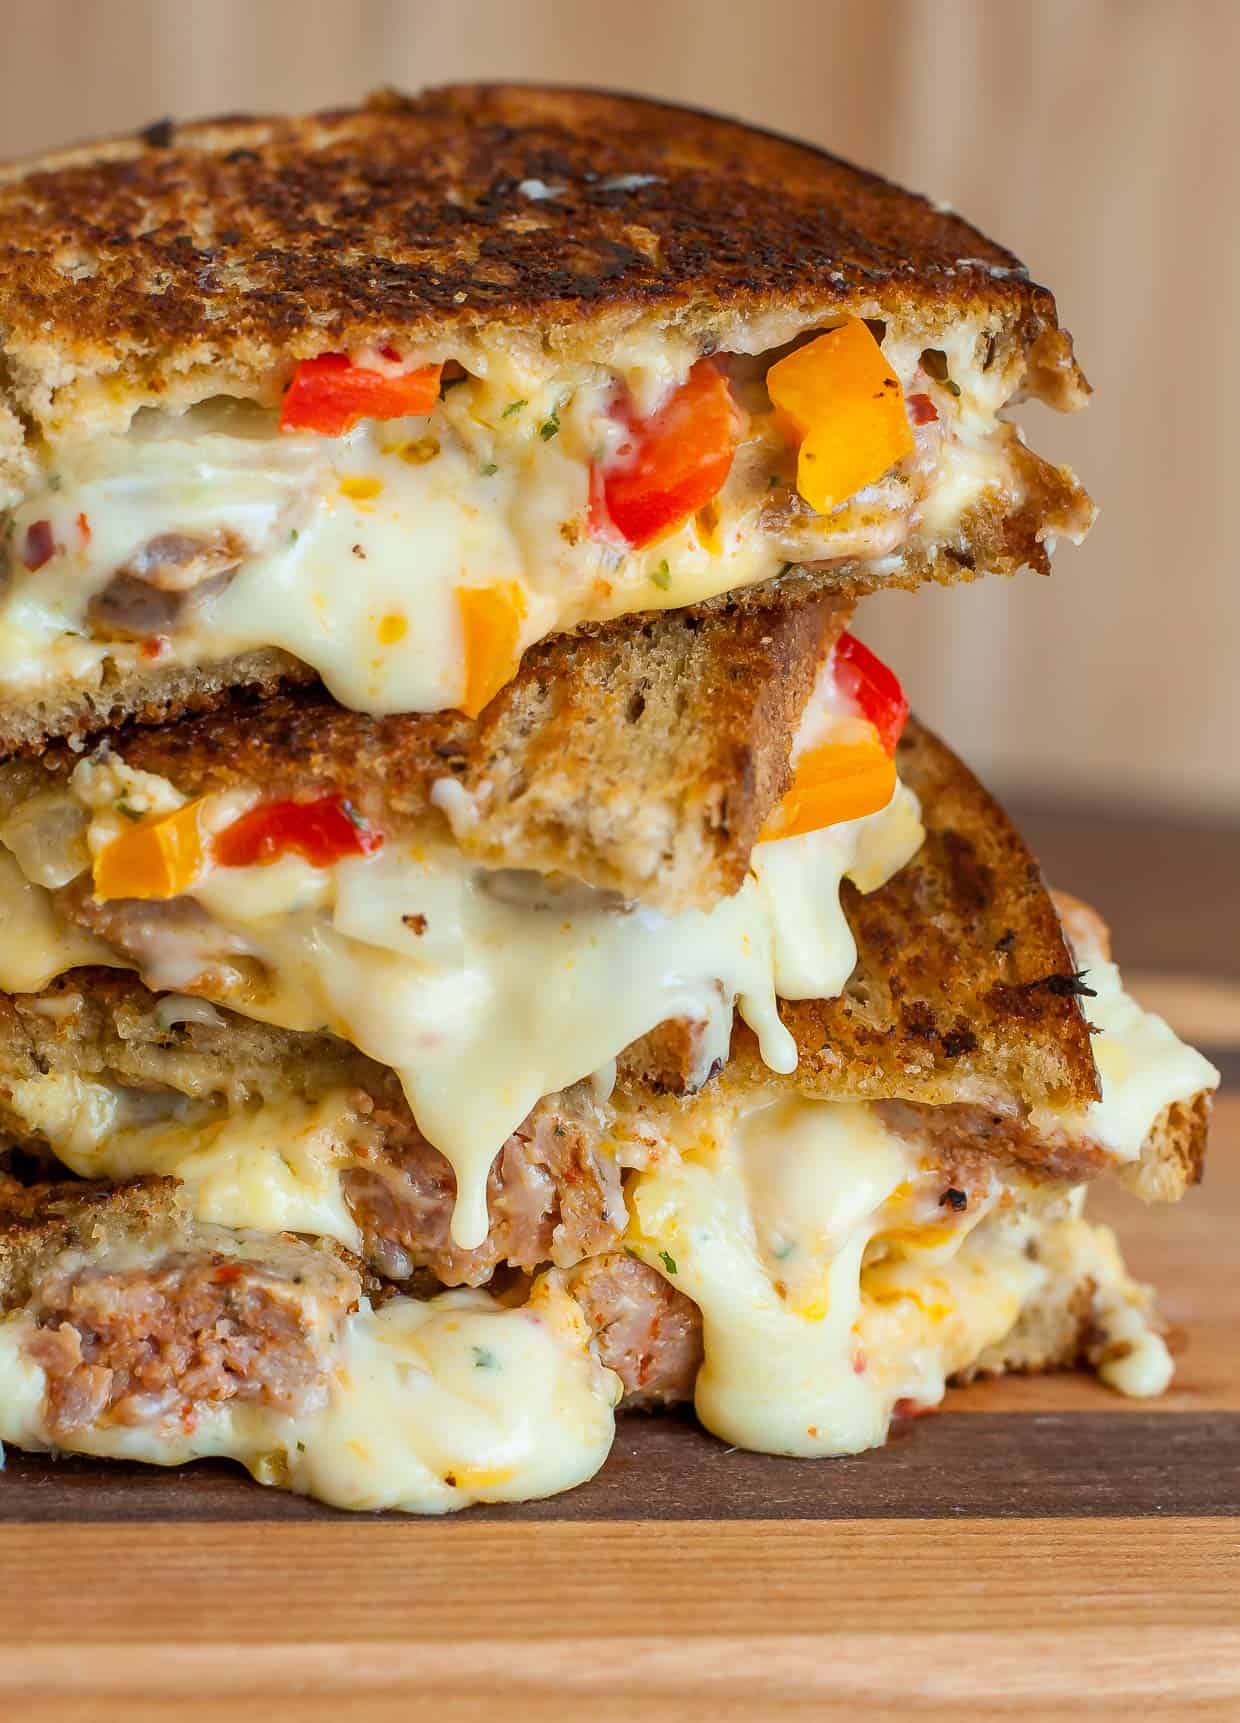 Sausage and pepper chipotle grilled cheese